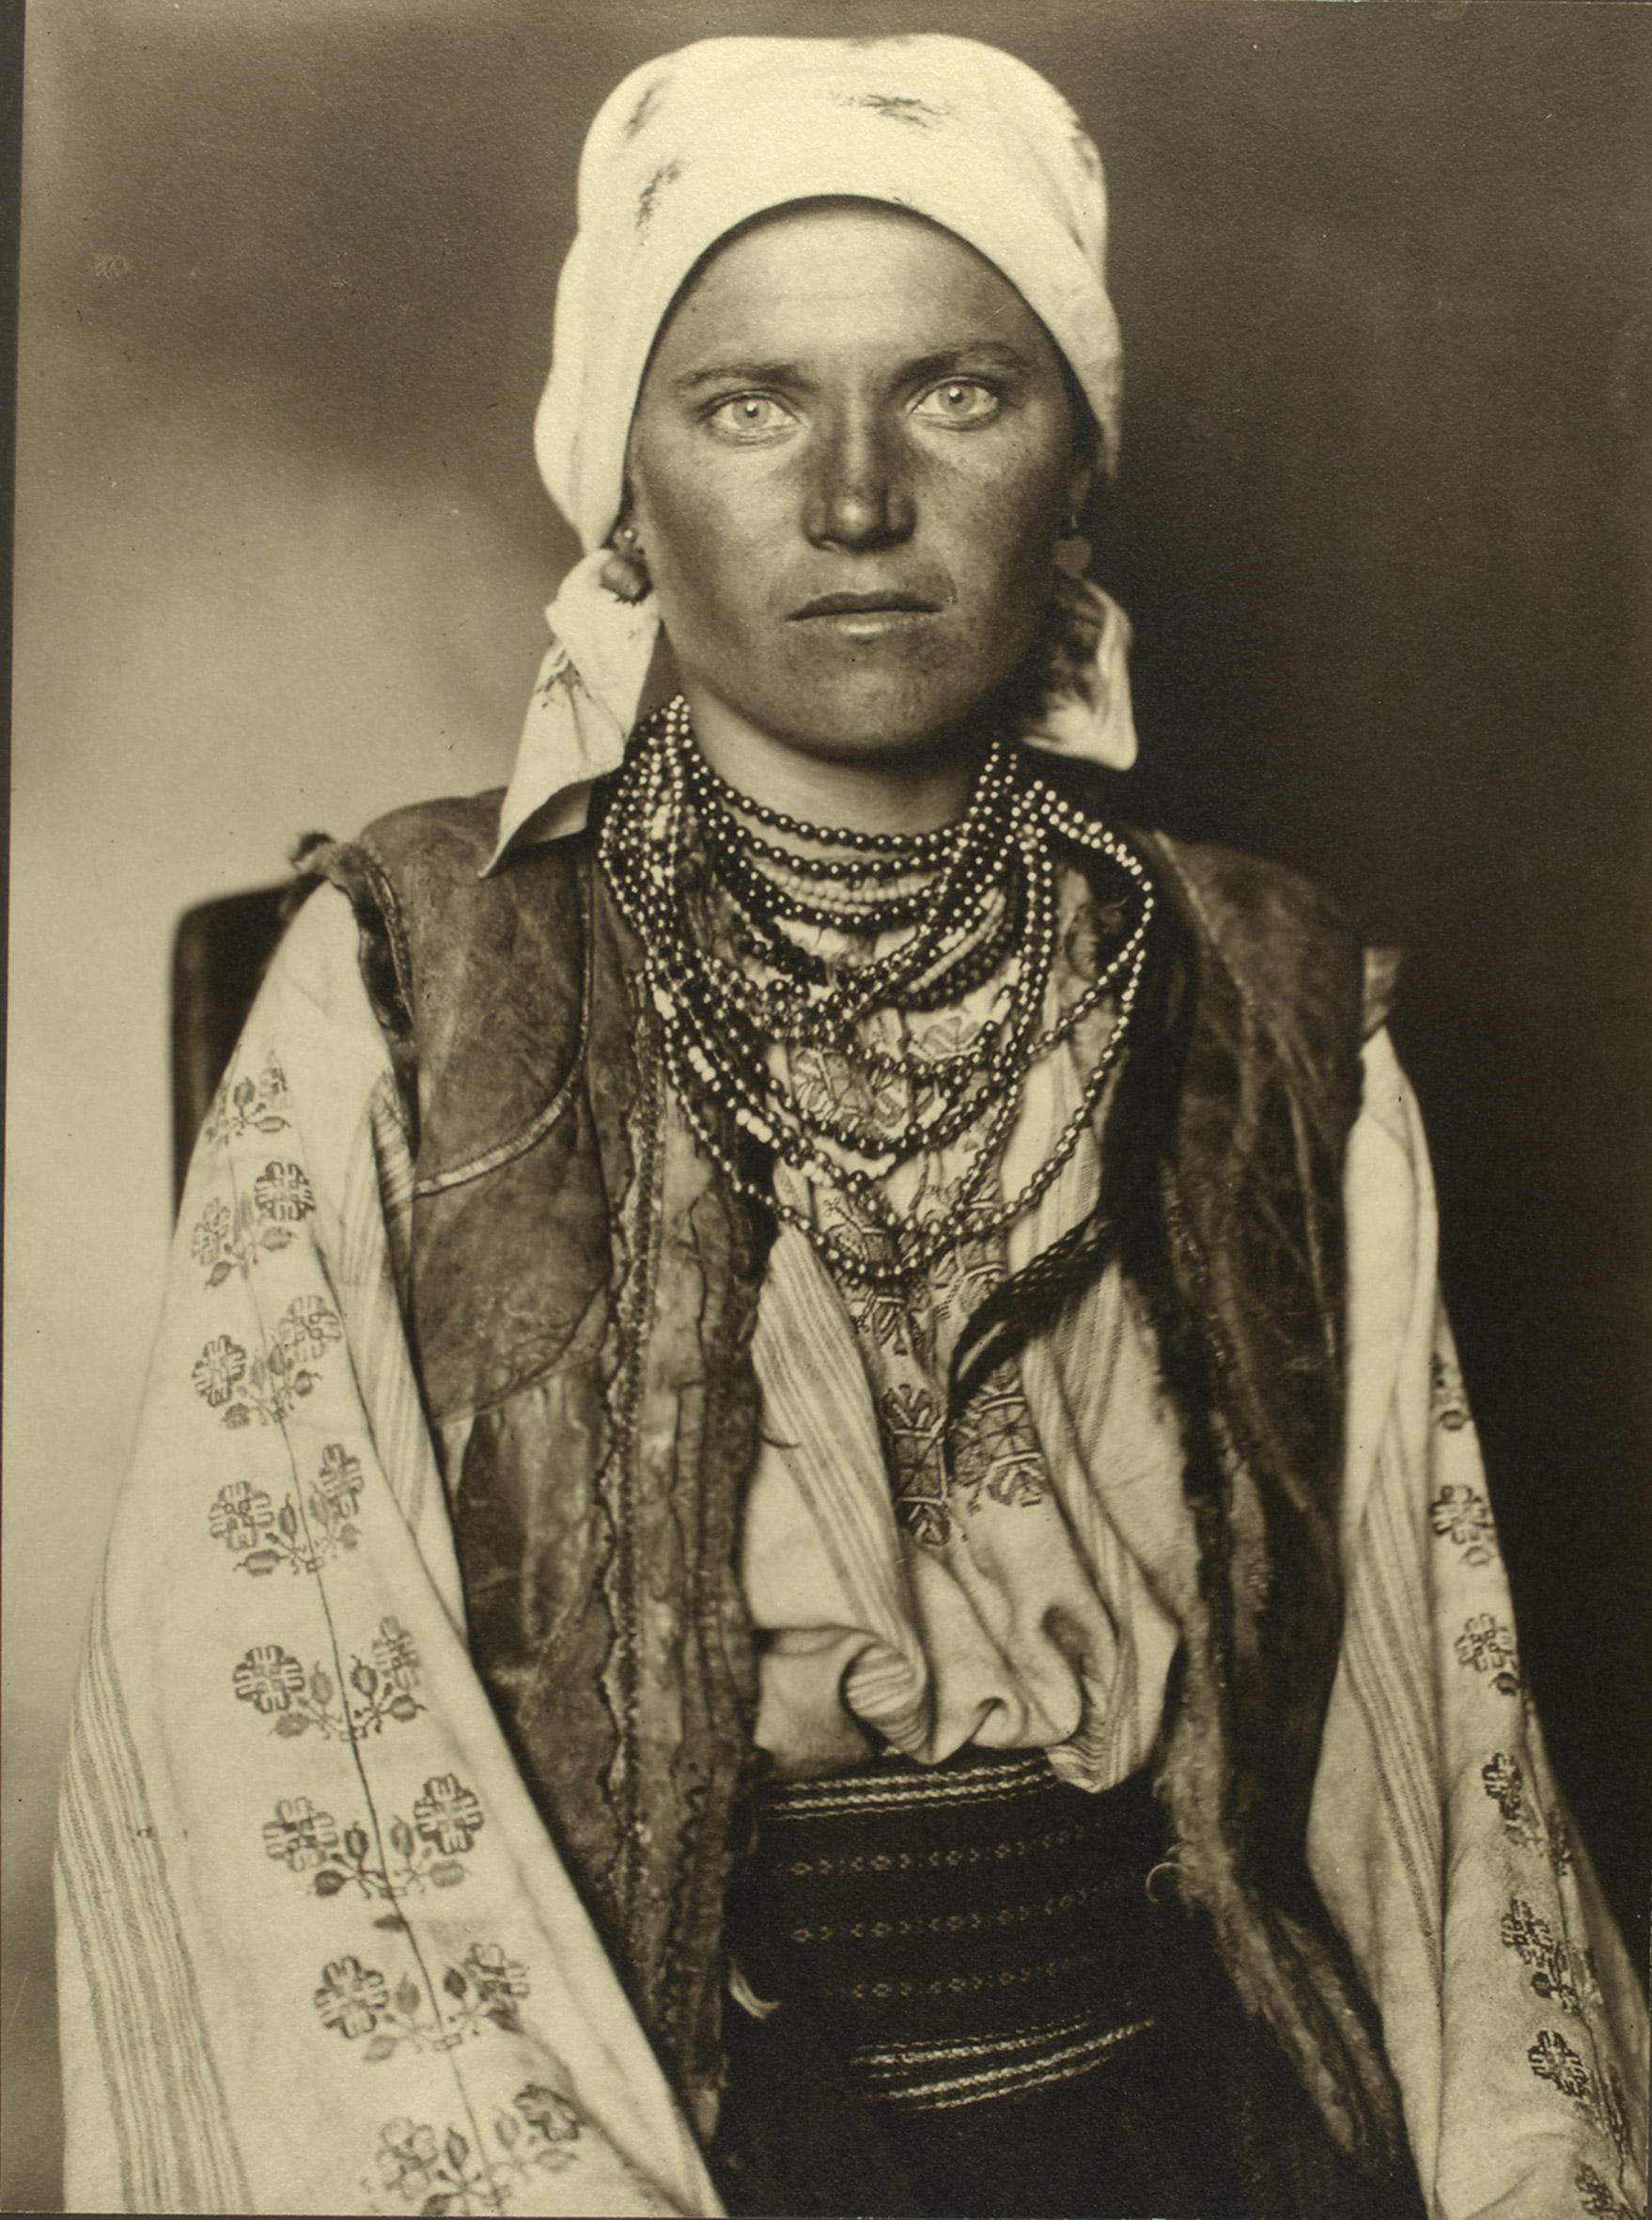 Portrait of a Ruthenian woman at the Ellis Island Immigration Station, 1906.